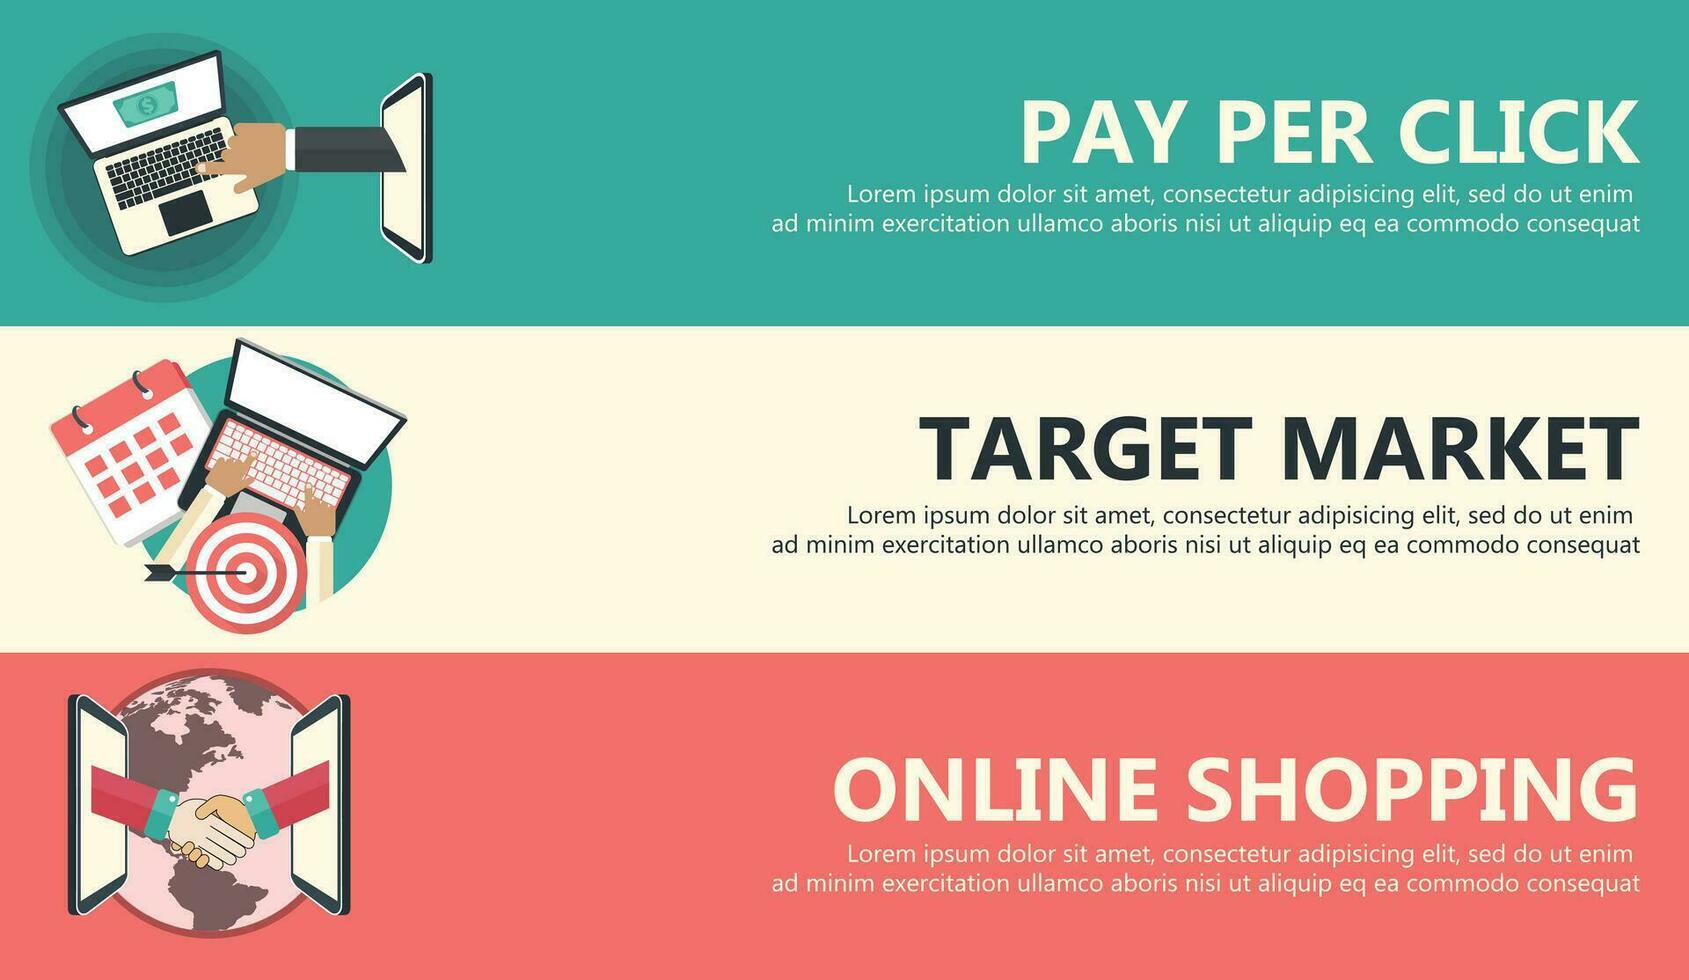 Pay per click, target market, on line shopping banners. Flat vector illustration